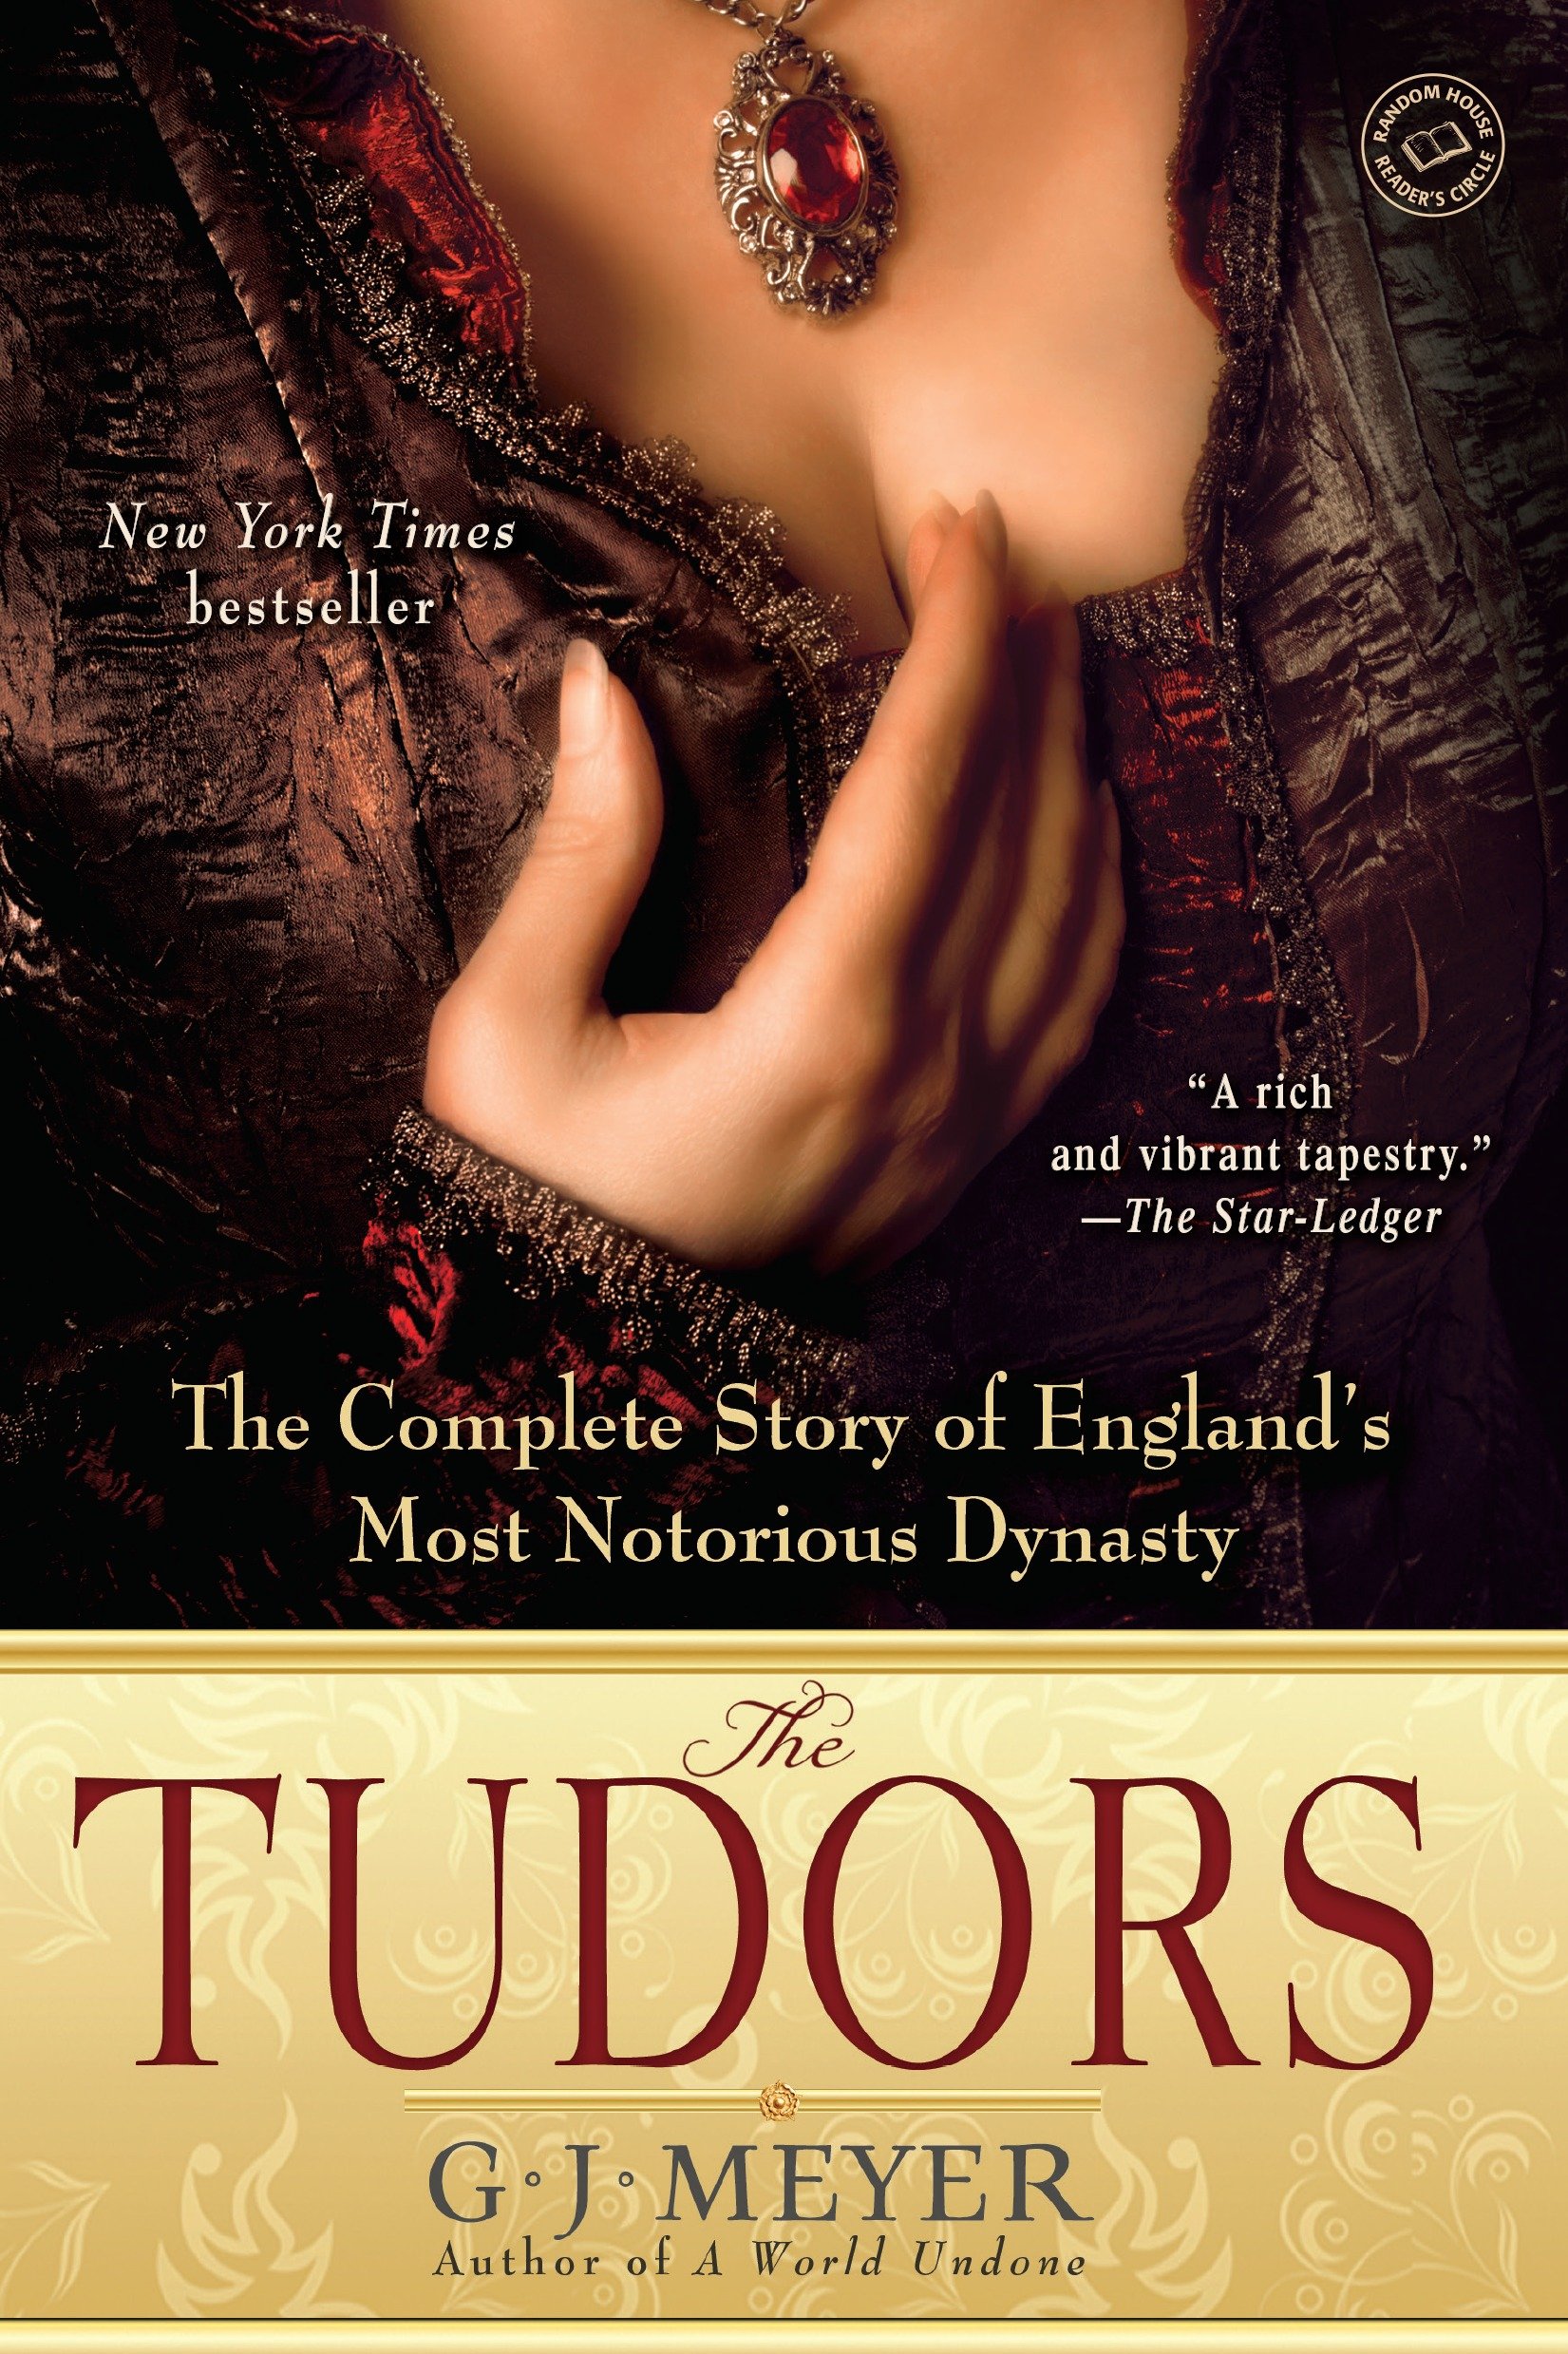 The Tudors the complete story of England's most notorious dynasty cover image